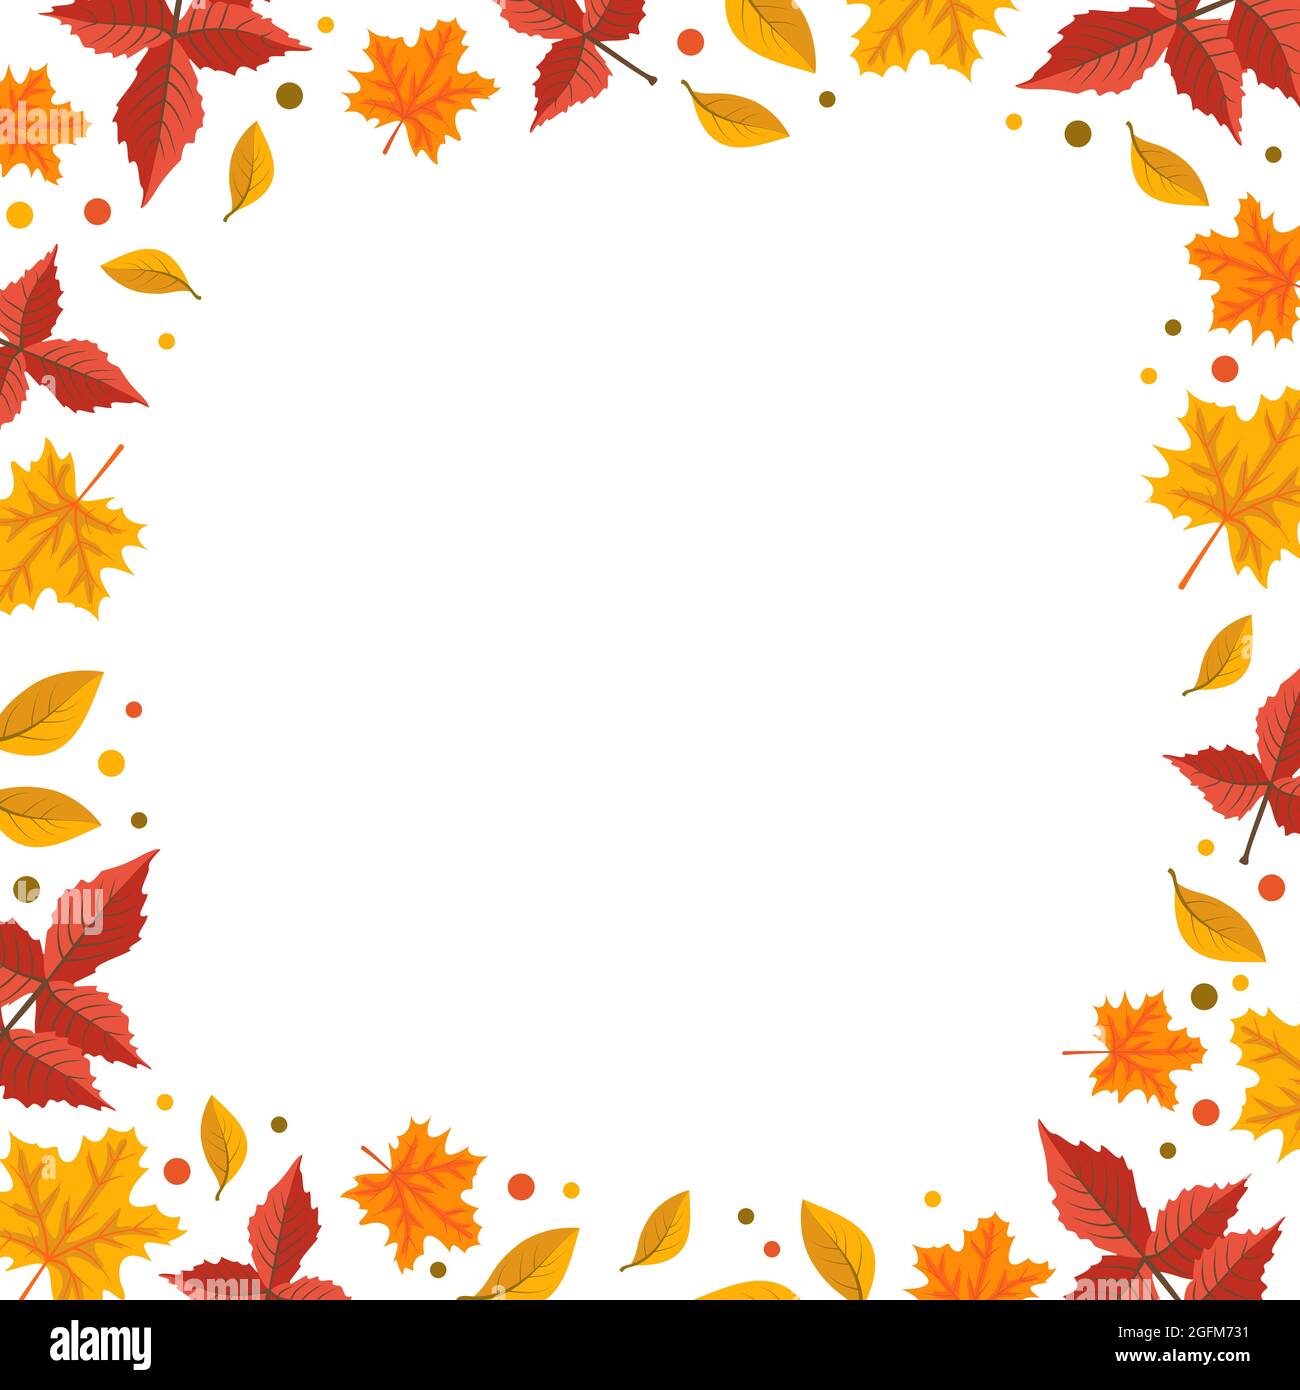 Autumn frame with orange maple and rowan leaves. Bright fall border with blank space for text Stock Vector